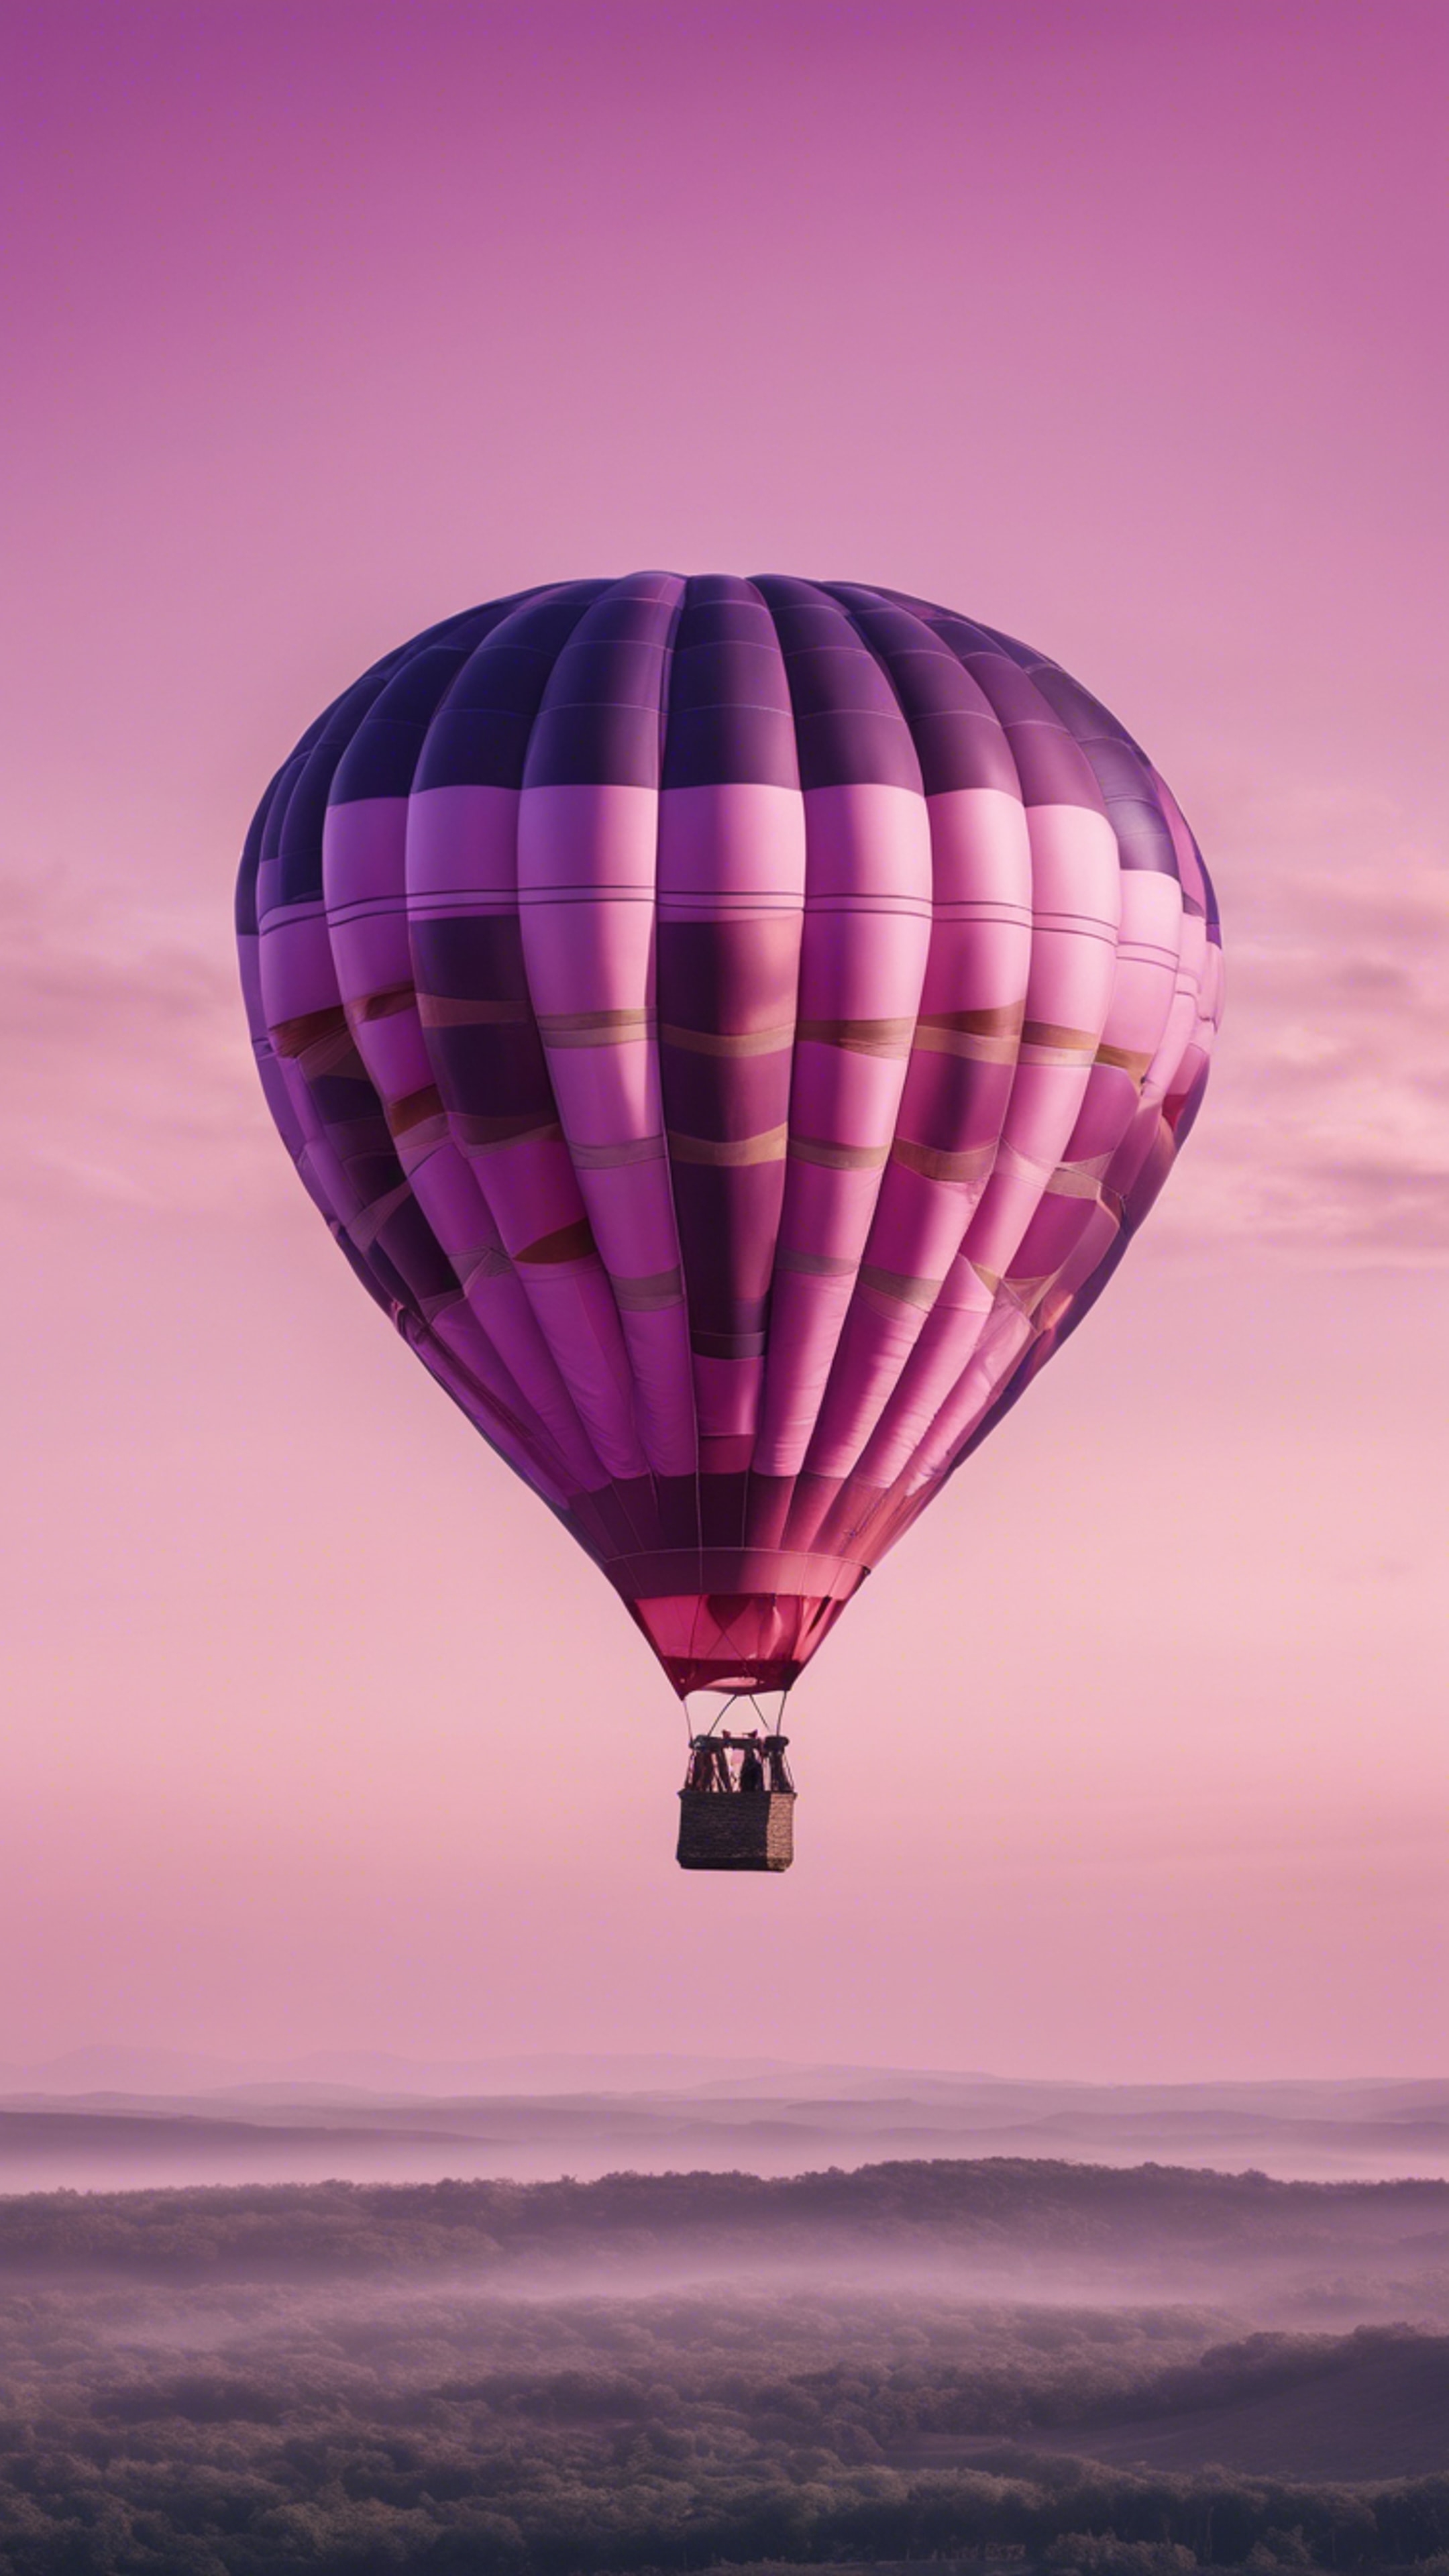 A pink and purple striped hot air balloon floating in a clear morning sky. Tapet[24bb758d911f4cfb8c8f]